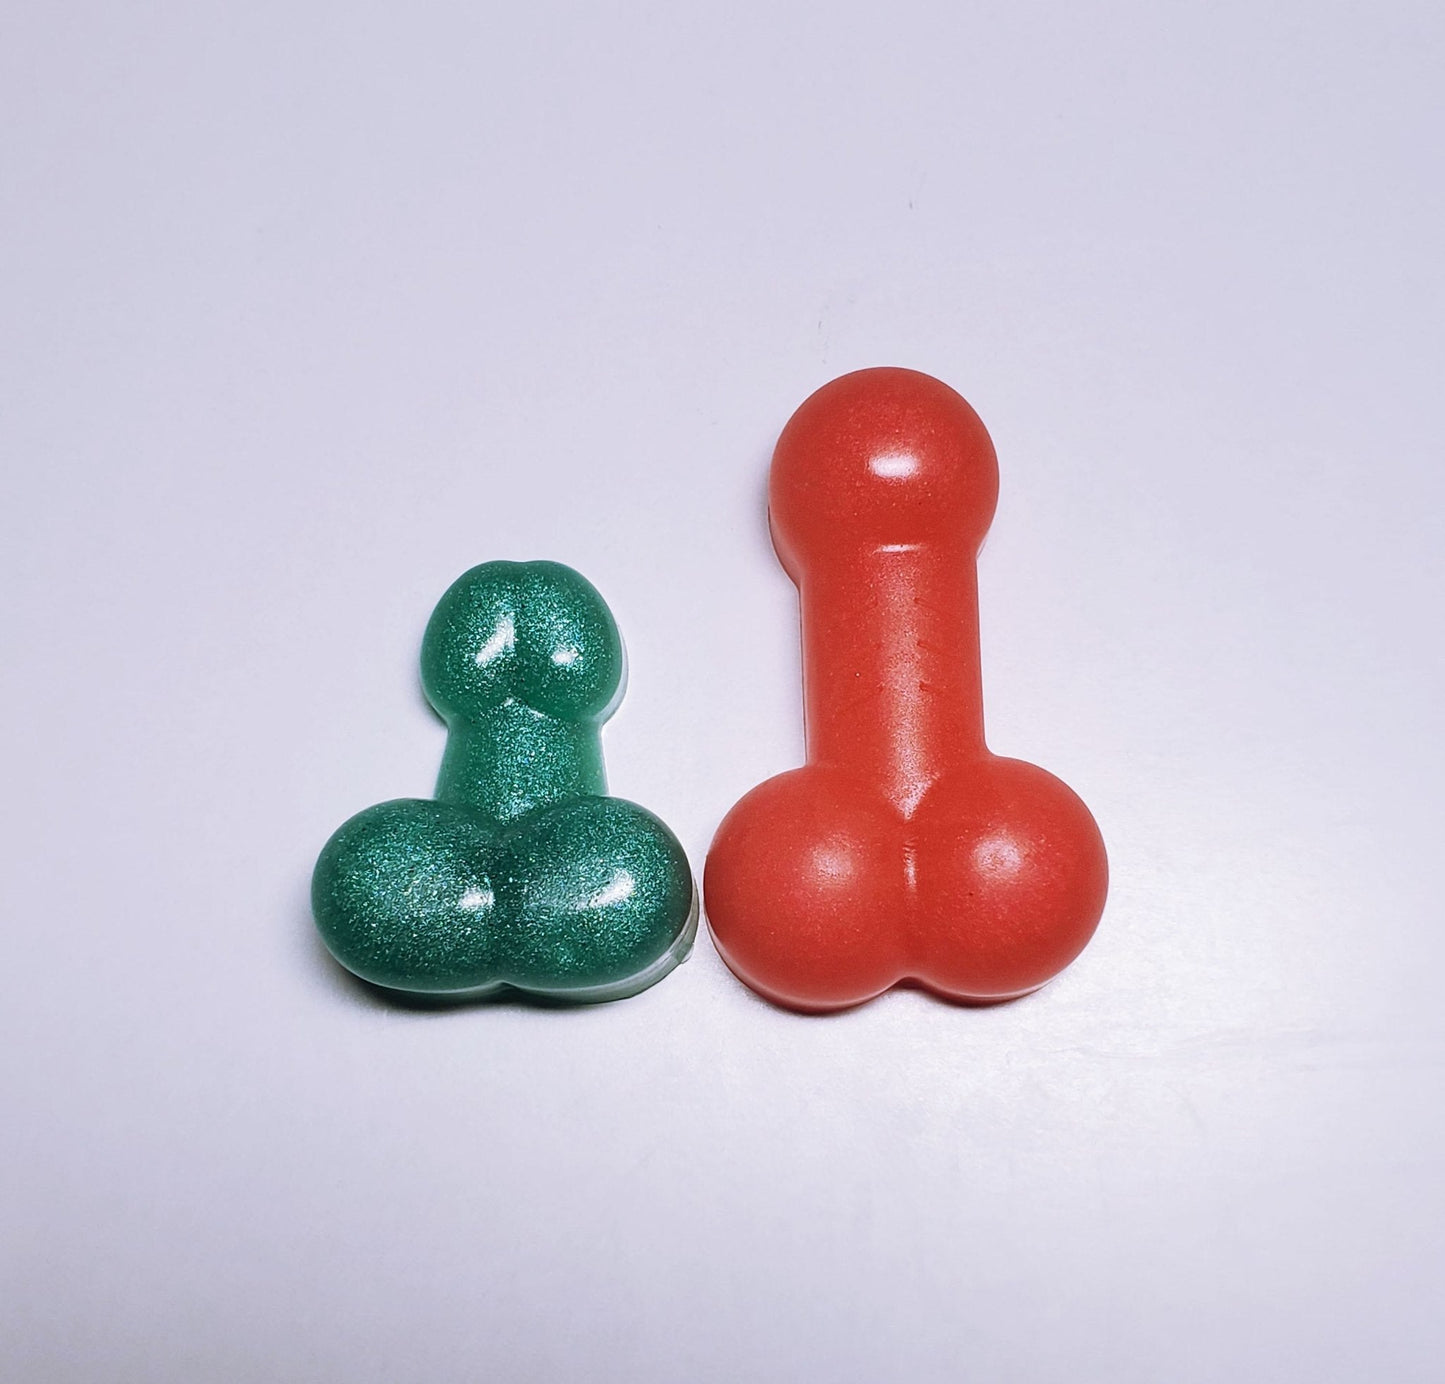 JELLY Soap | Tiny Bag of Dicks | Price is for ONE piece | Tiny Penis Shape | 1.41 in x 1.14 in | Gag Gift | Multi Use Soap